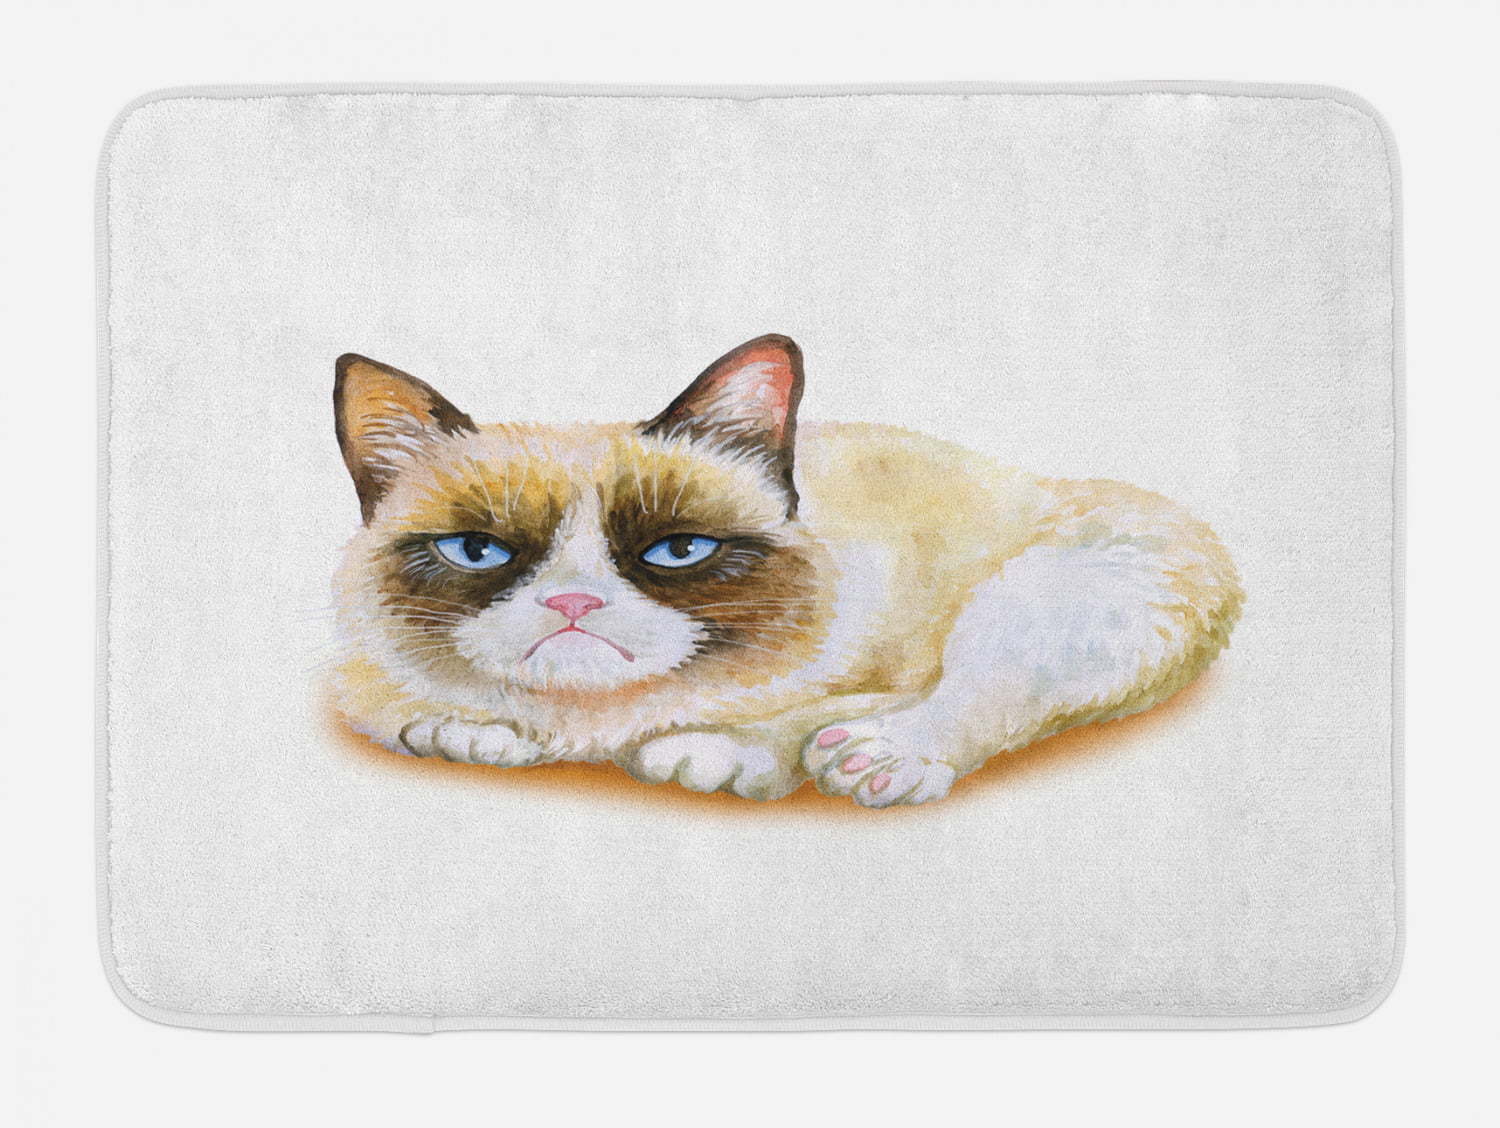 DOORMAT--18 X 27--China Blue Siamese Cats Non-skid rubber backed, 